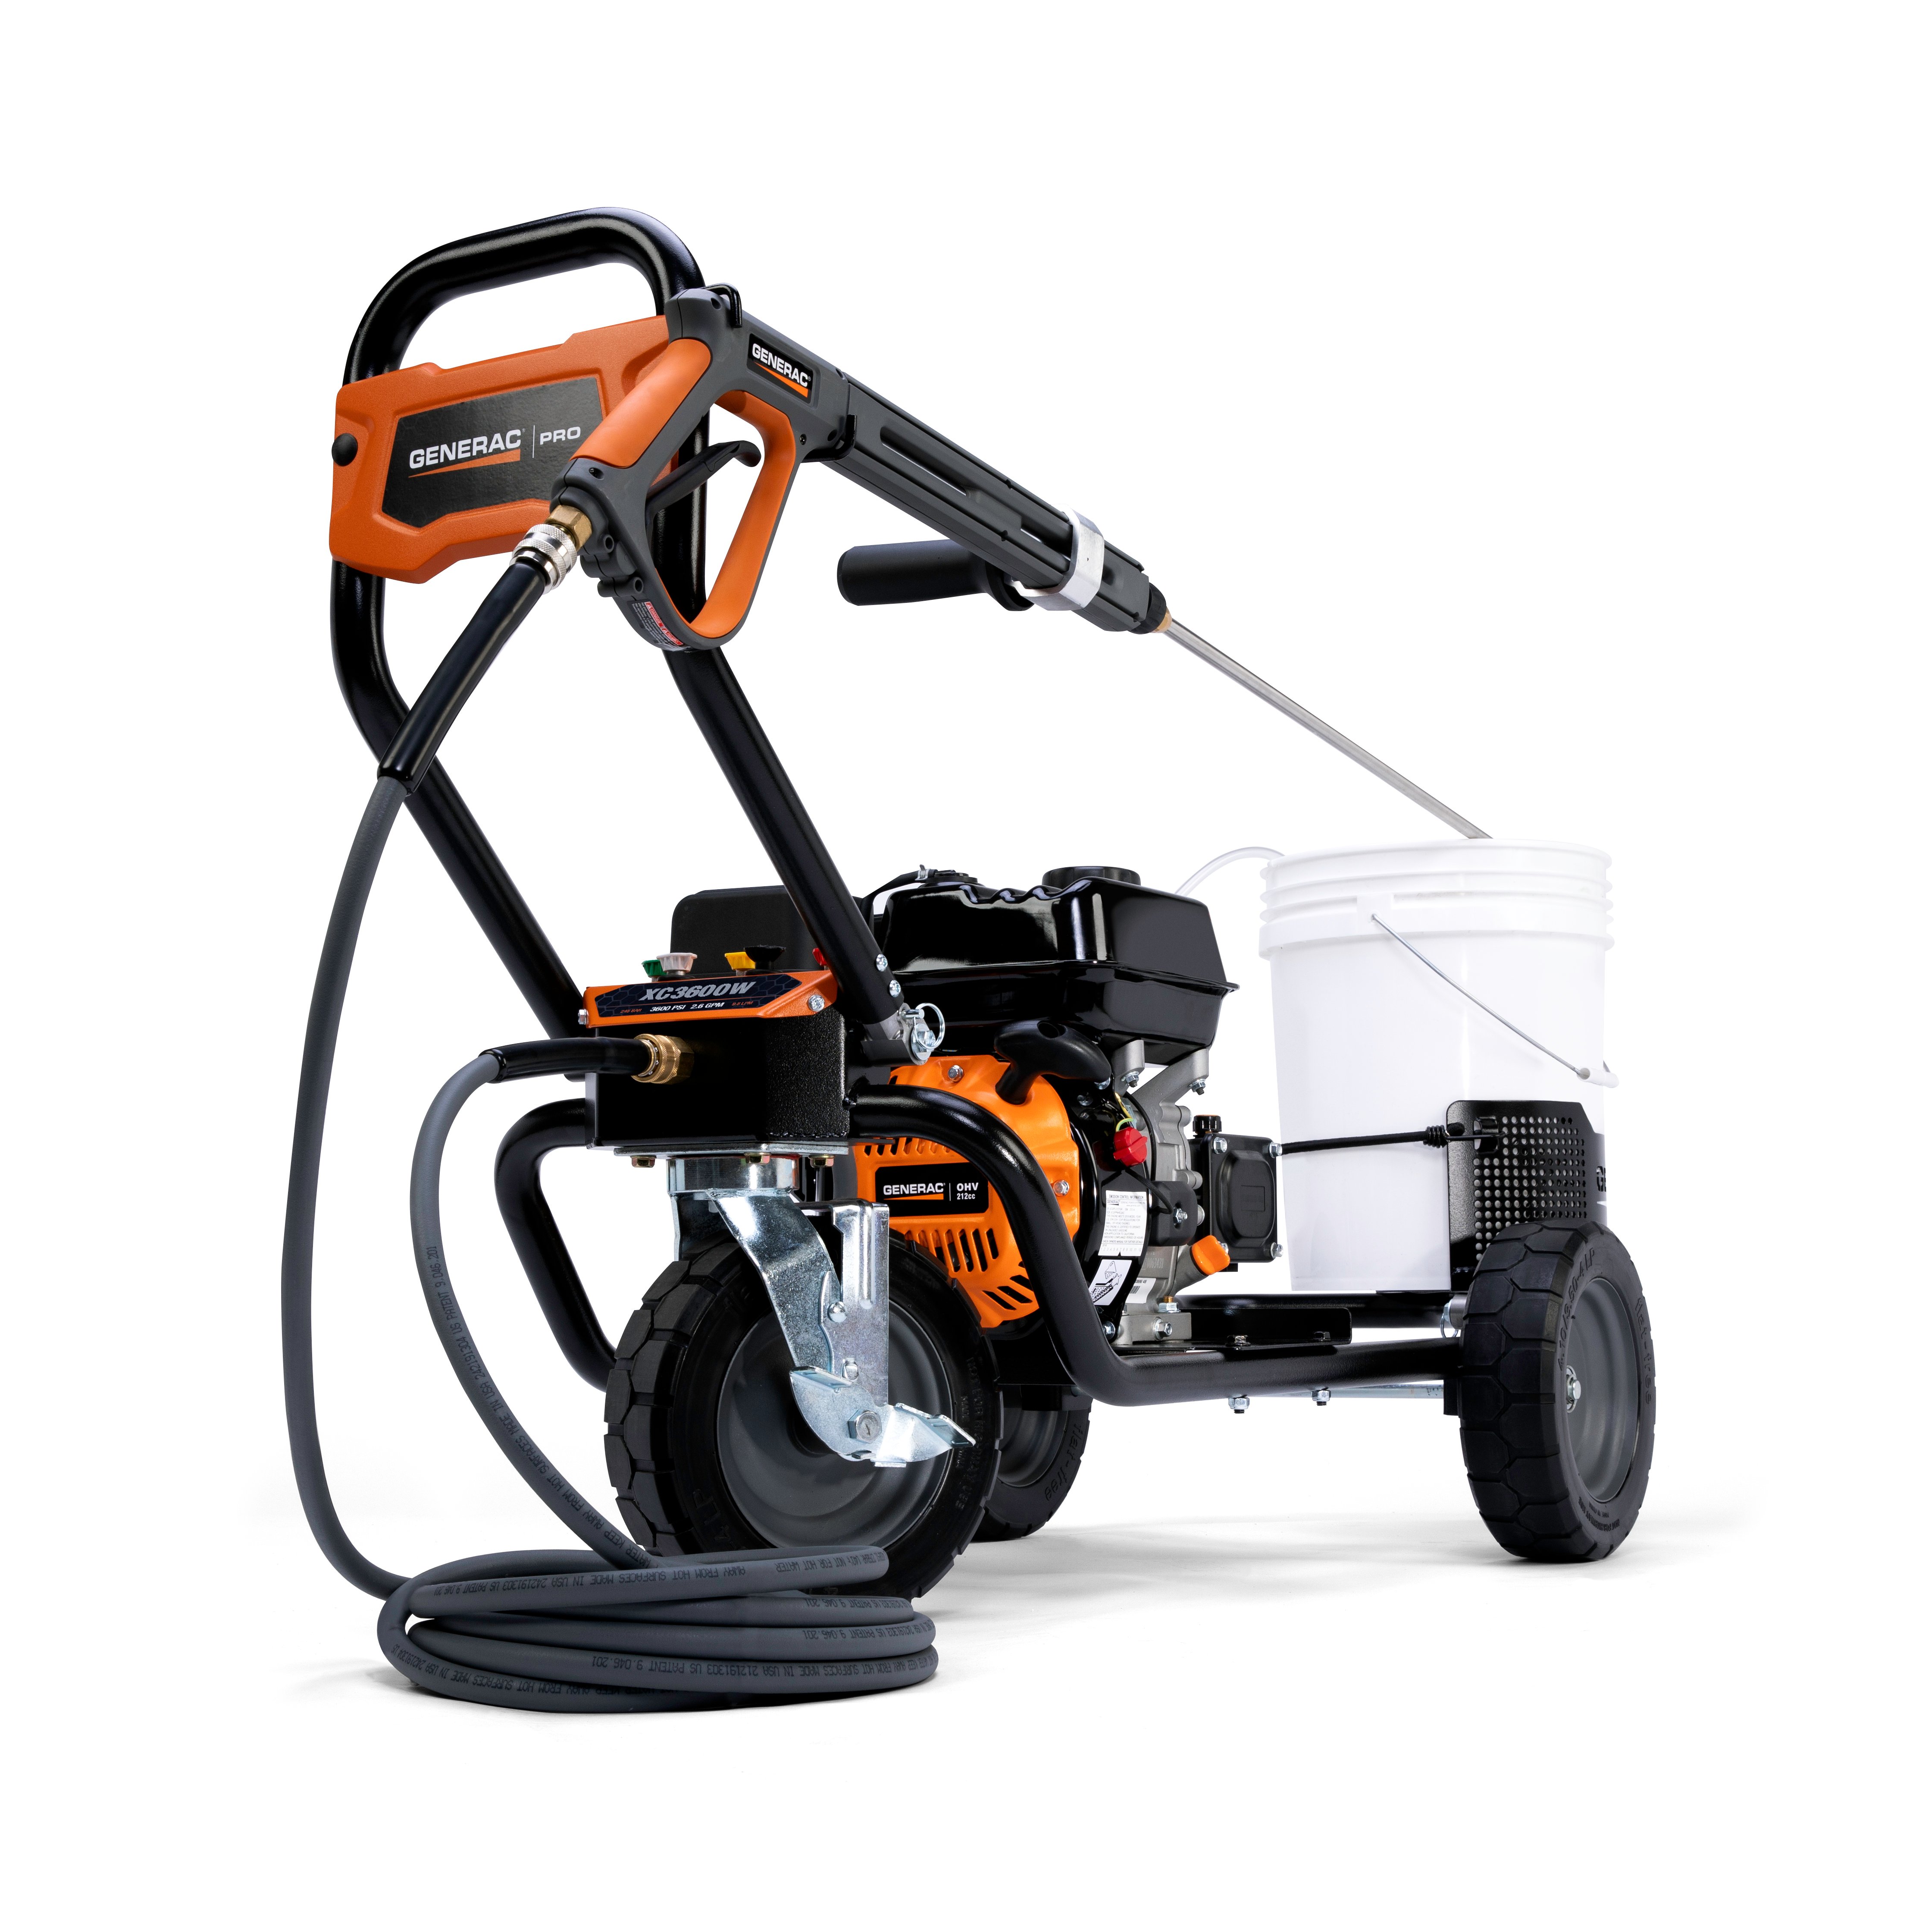 Pressure Washer 3600PSI 2.6GPM Product Image